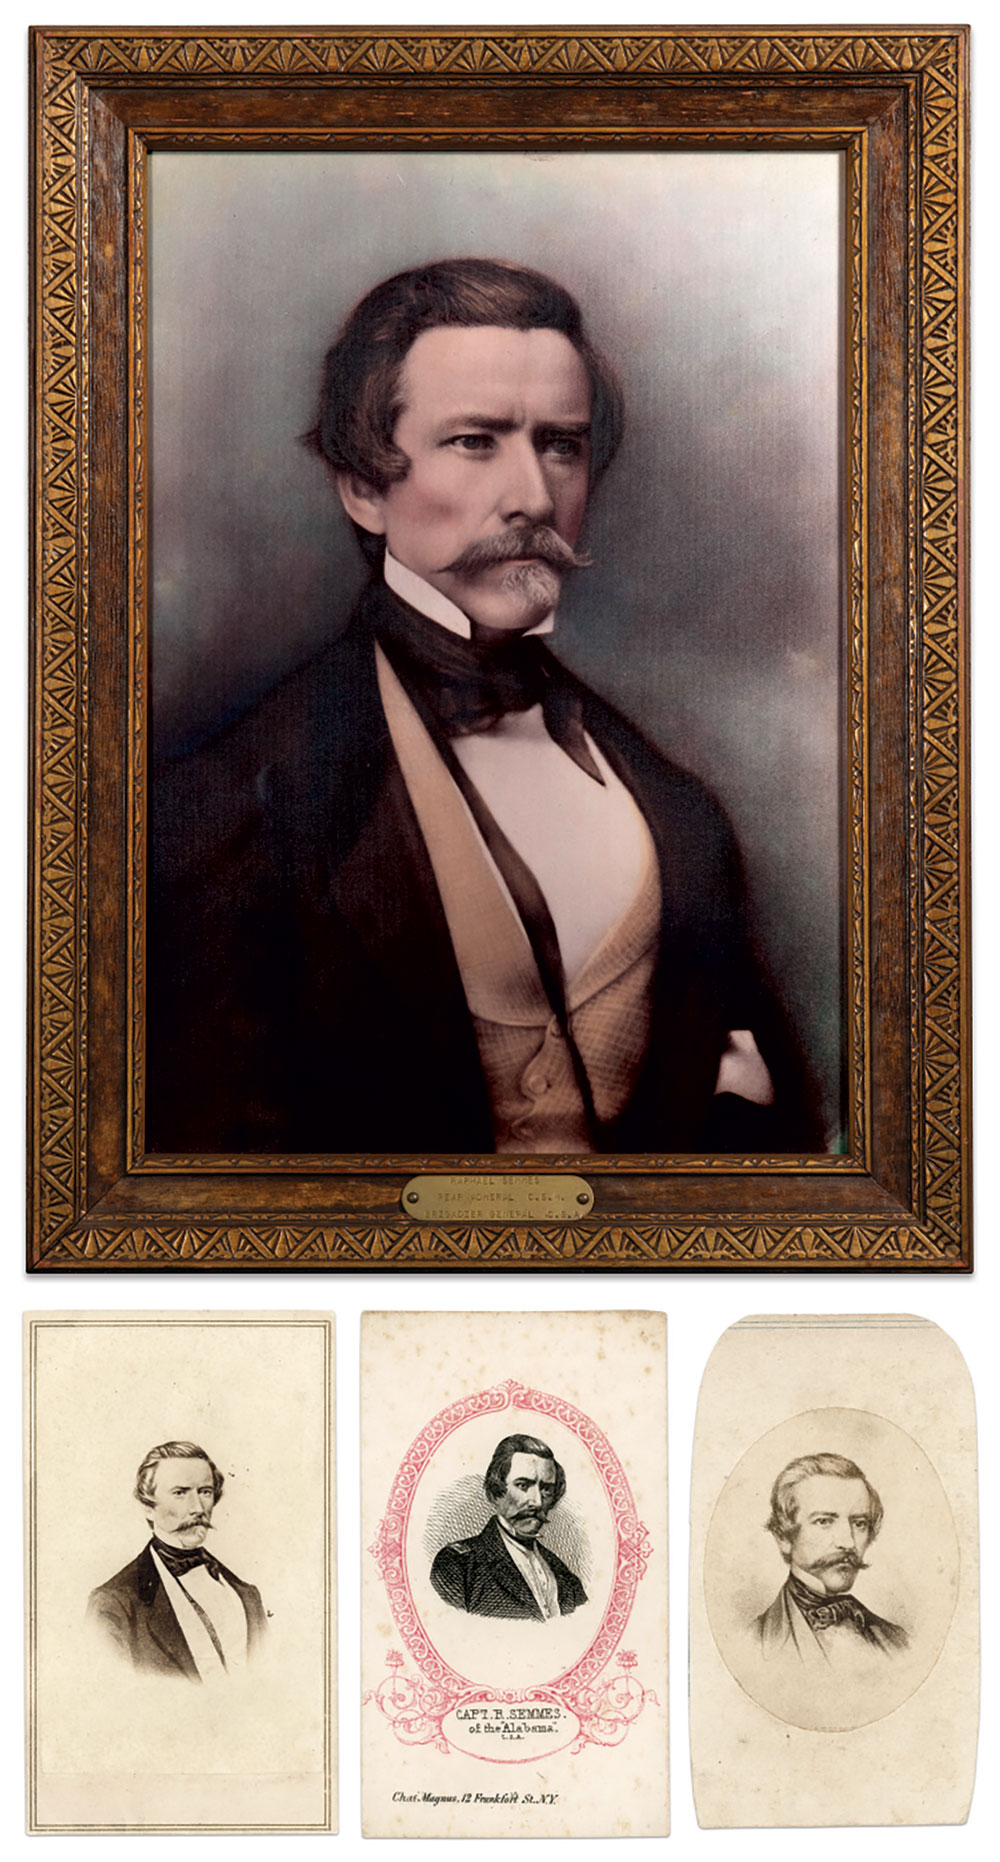 Semmes sat for this portrait (top) in the late 1850s. His stern countenance and developed mustache and beard make him appear considerably older than his circa 1857 ambrotype. Enterprising photographers sold artistic variations as cartes de visite (above) after he attained notoriety as a raider. Counterclockwise from top: Print by an anonymous photographer, Collection of the History Museum of Mobile, Photo by Jeff Tesney/Mobile, Ala.; Cartes de visite from the author's collection by Edward and Henry T. Anthony of New York City, Charles Magnus of New York City and Quayle and Gault of Hamilton, Bermuda.